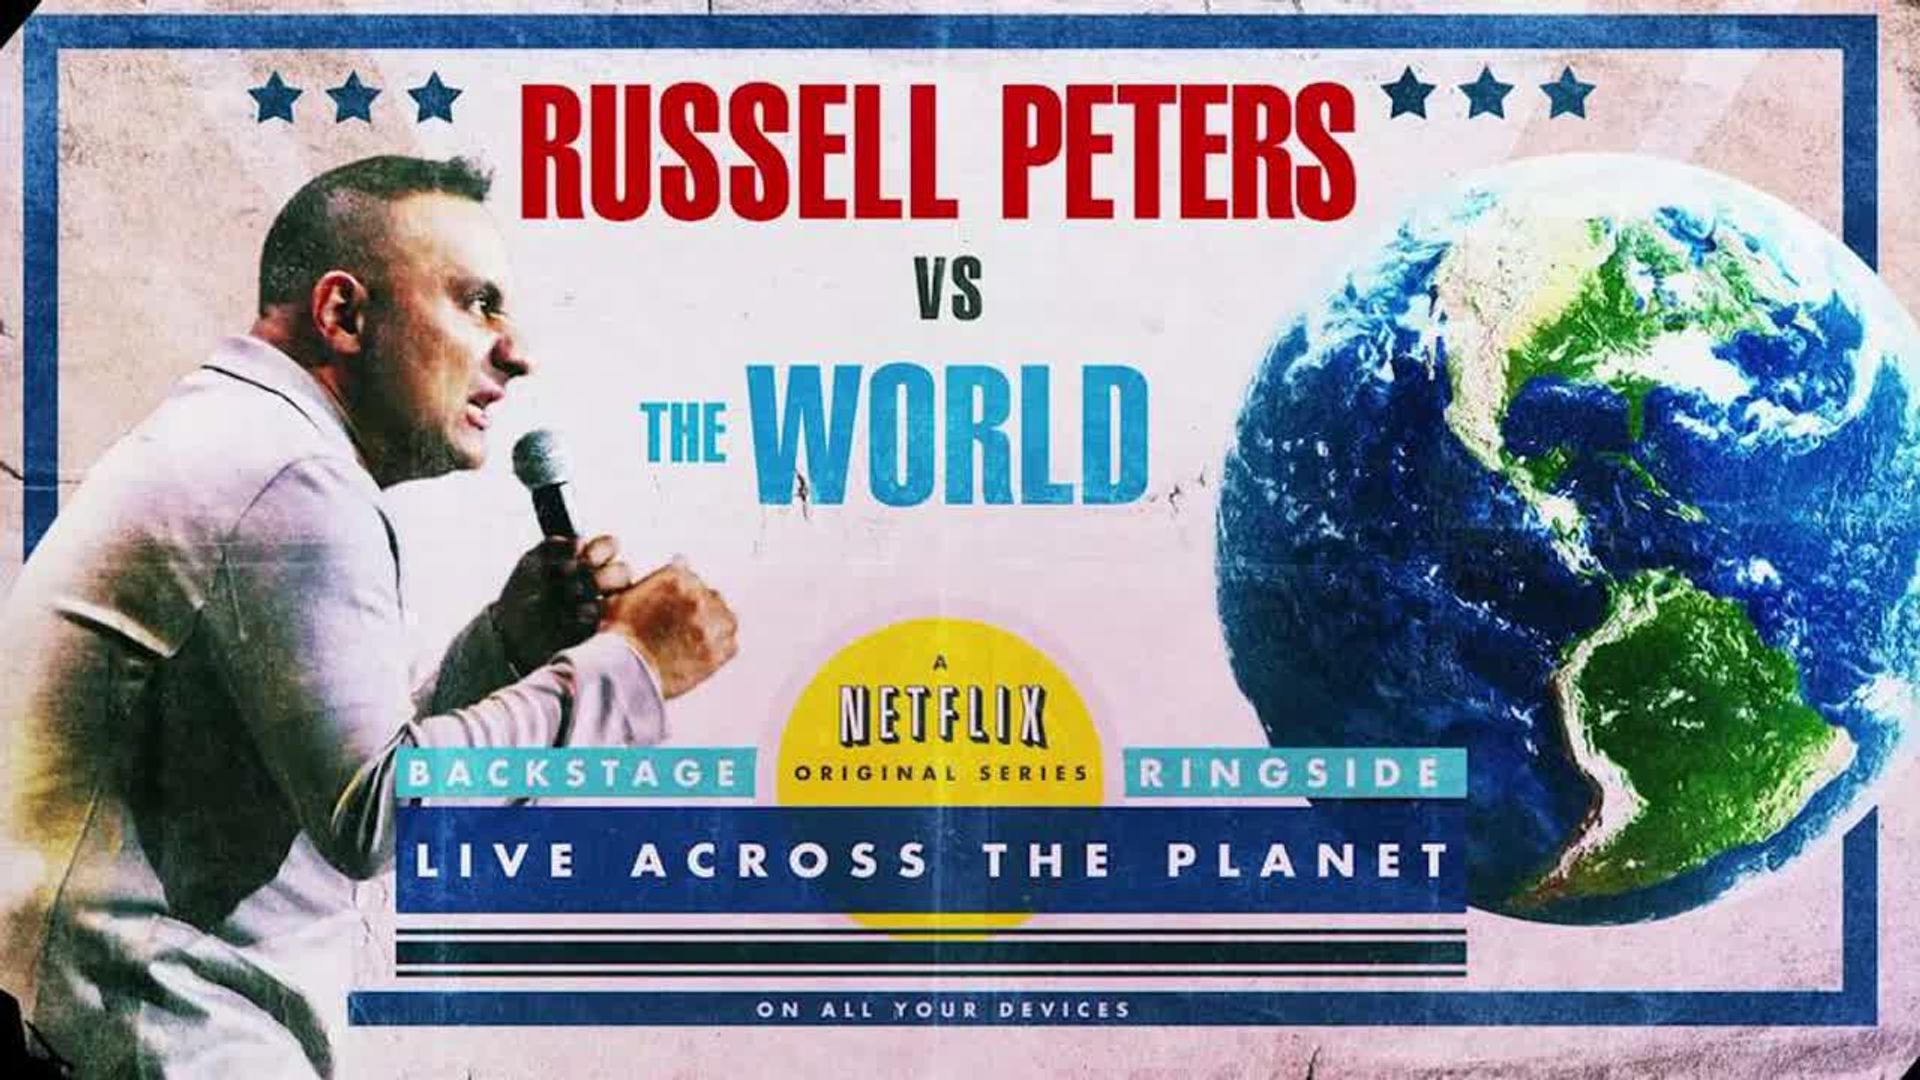 Russell Peters vs. the World Backdrop